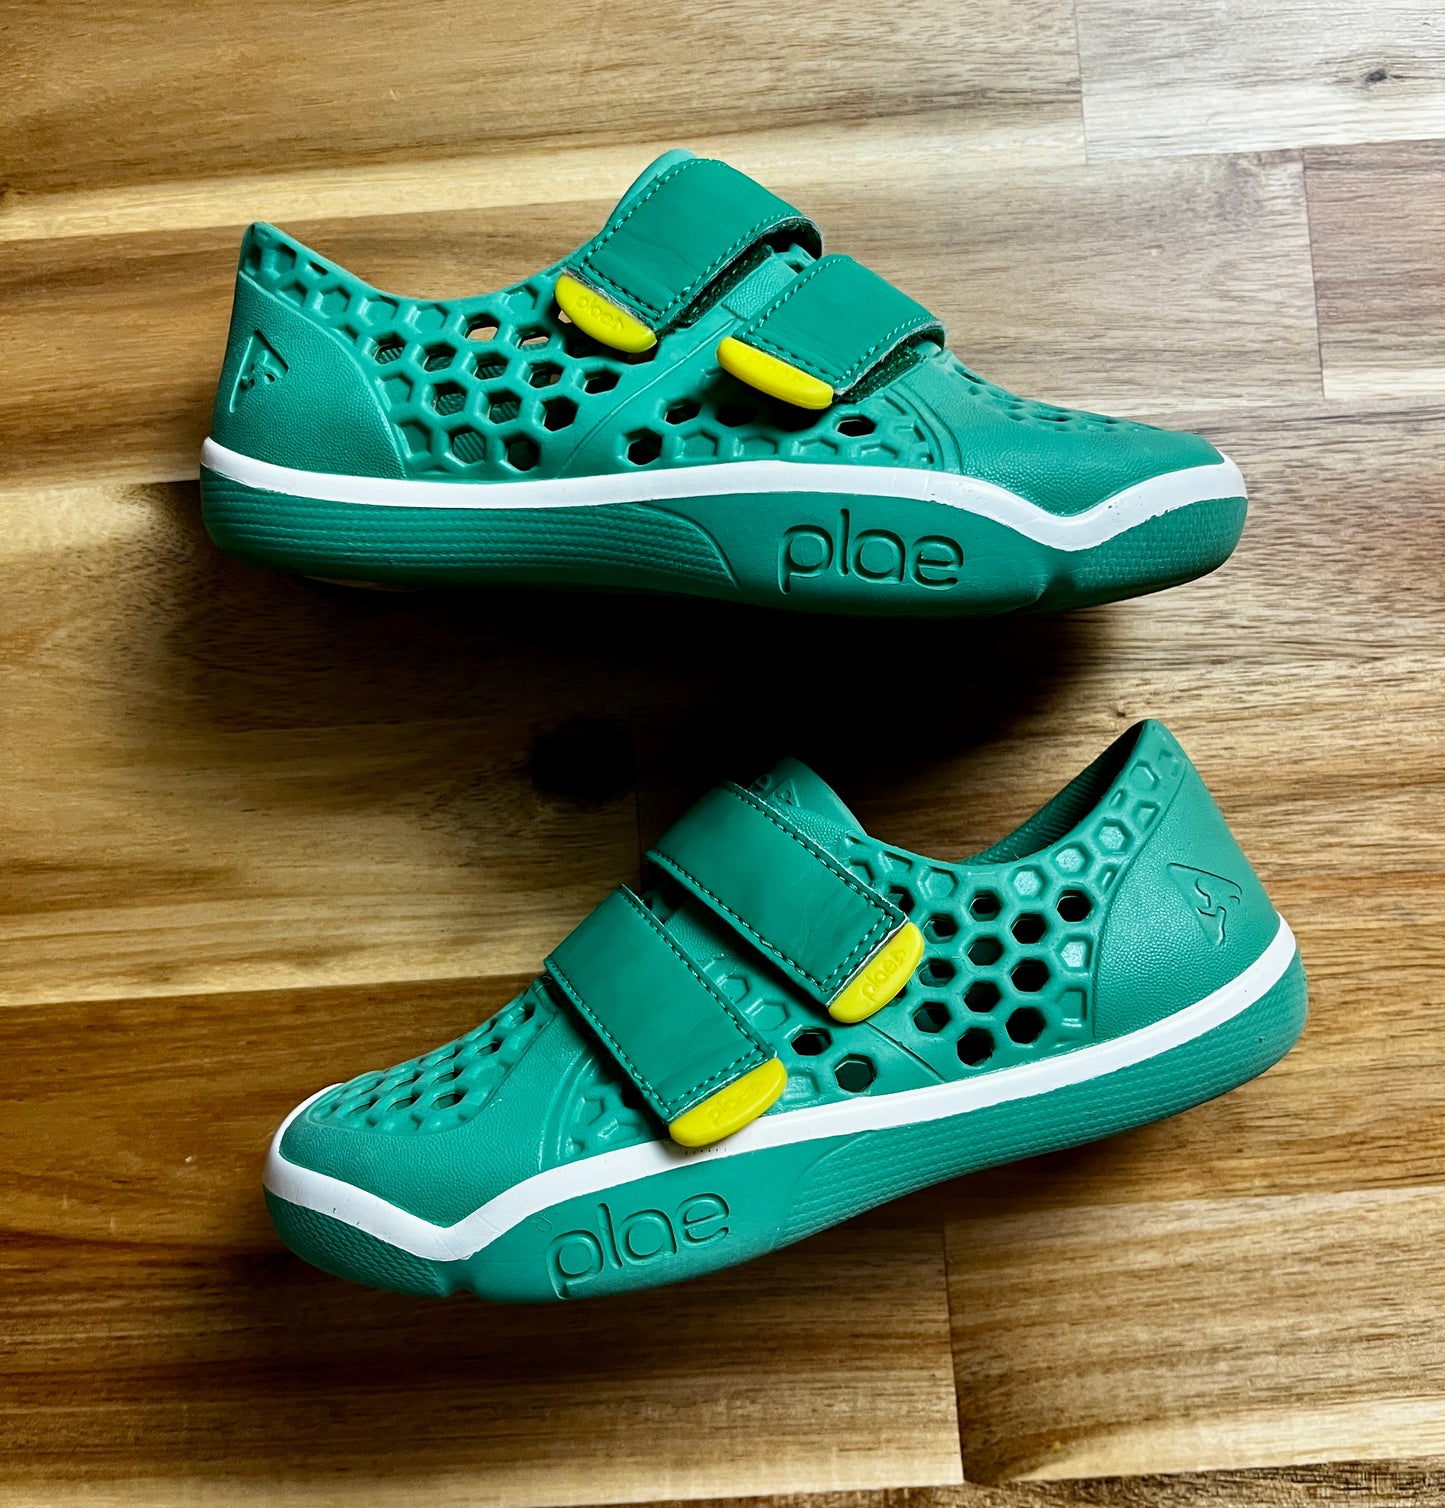 Plae Mimo Green Shoes Toddler Size 11